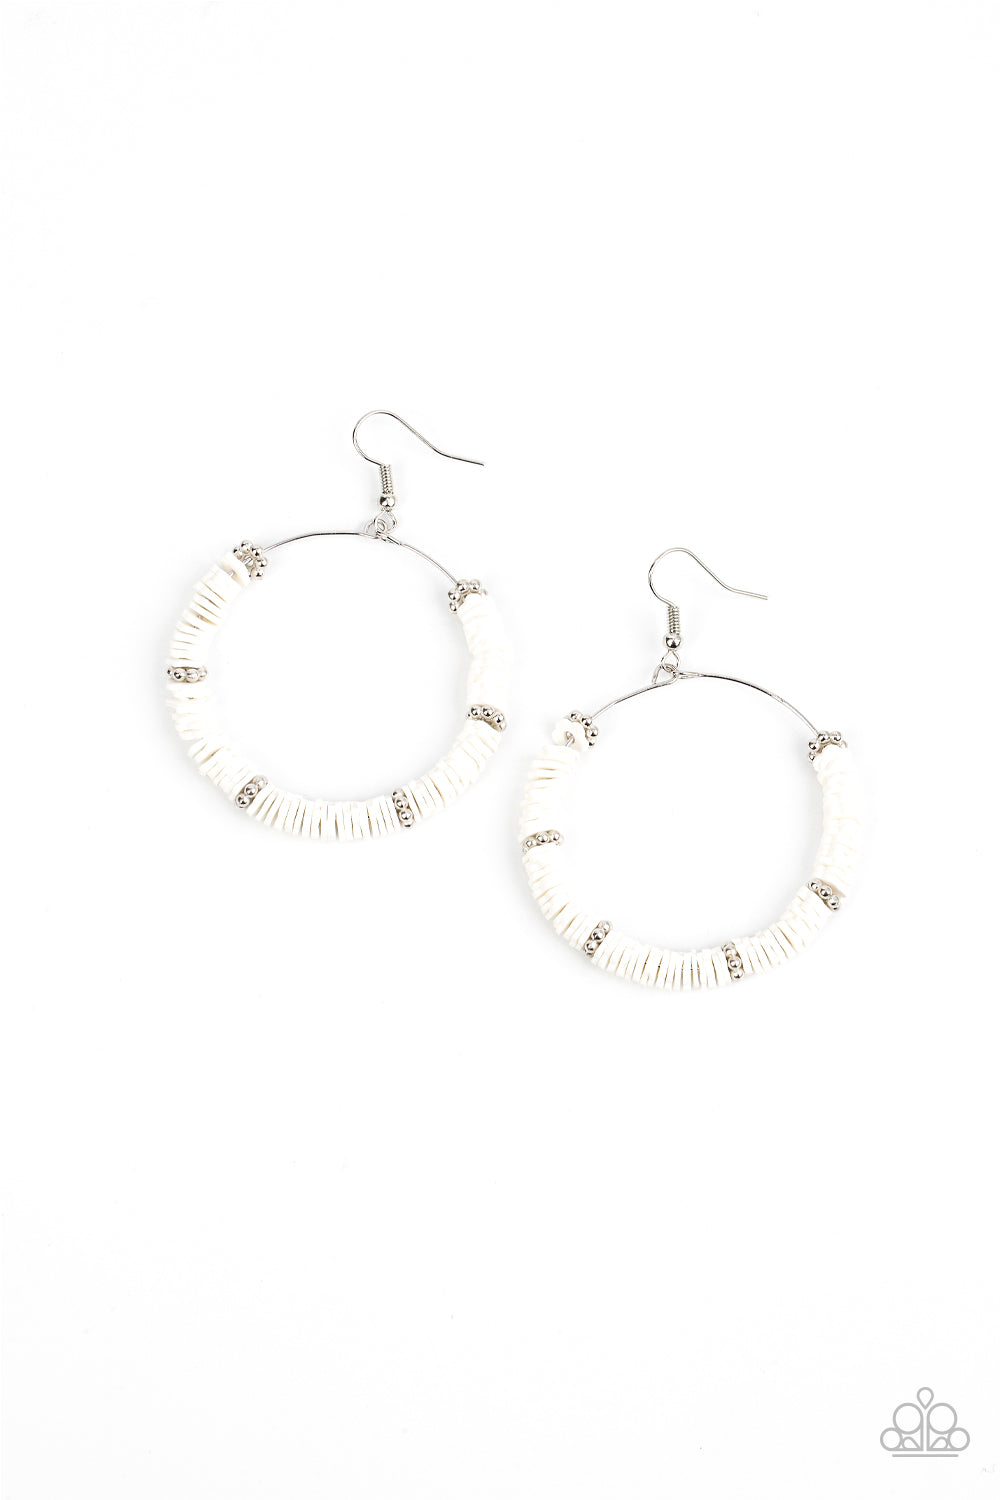 Loudly Layered - White And Silver Flower Earrings - Paparazzi Accessories - Infused with studded silver floral-shaped rings, a flirty collection of rubbery white flowers are threaded along a dainty wire hoop for a whimsical pop of color. Earring attaches to a standard fishhook fitting.